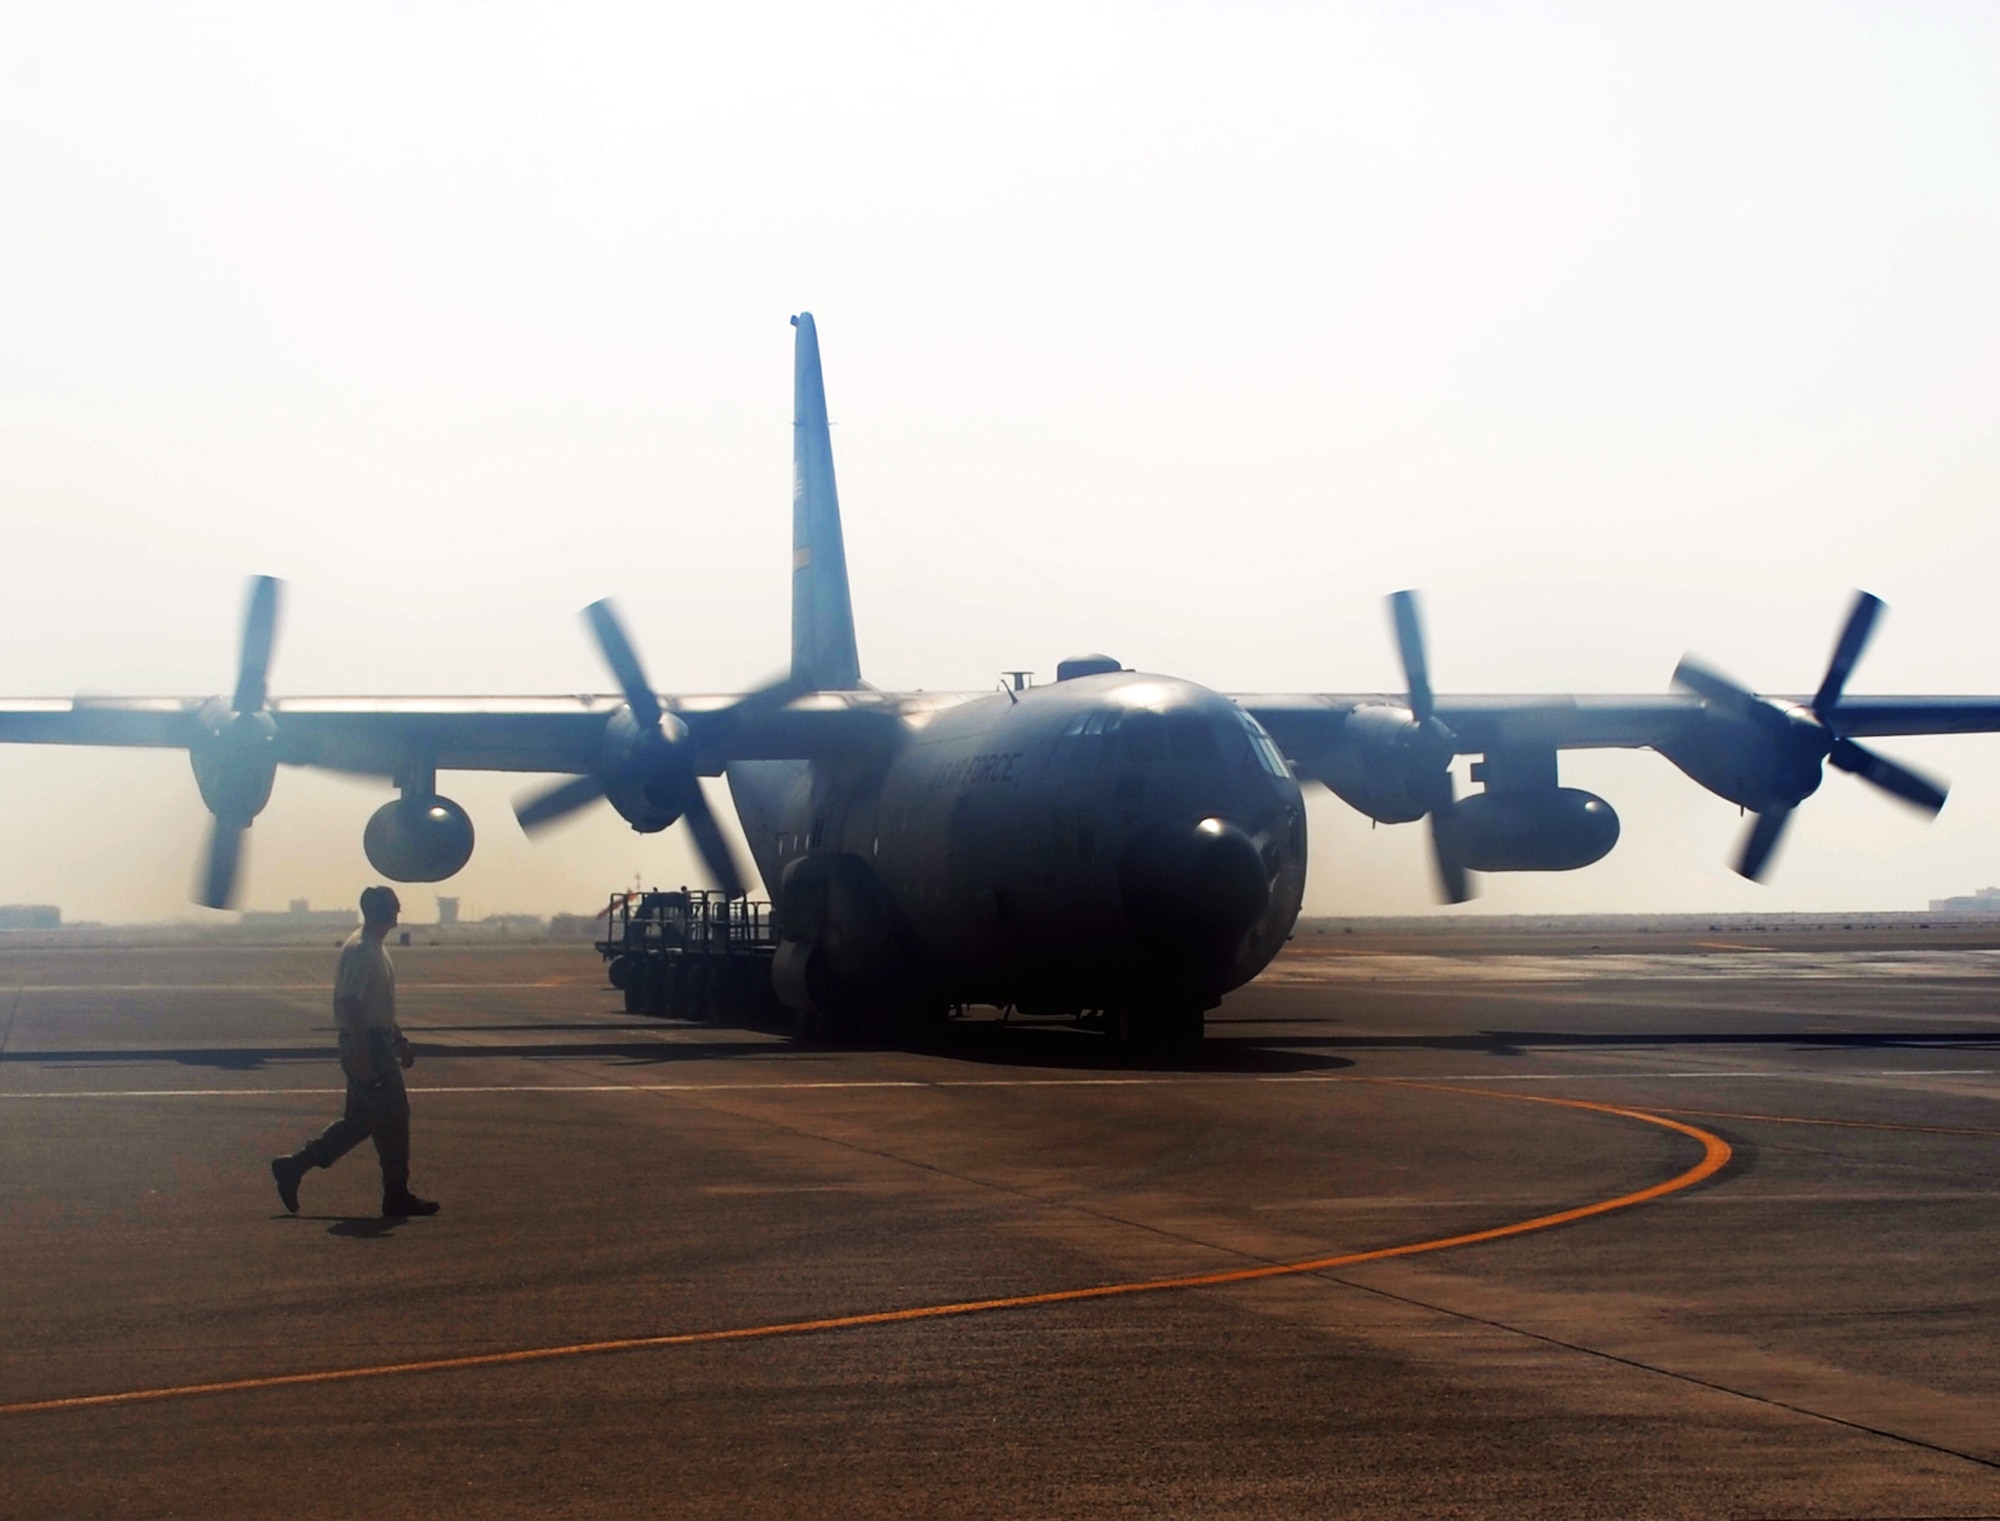 An Air Force Reserve C-130 Hercules and its crew, along with aerial port Airmen and maintenance Airmen, perform an "engines running off-load" at a non-disclosed base in Southwest Asia on Feb. 16, 2010.  The C-130, deployed from the 911th Airlift Wing at Pittsburgh, Penn., is one of the main airlift airplanes used in the U.S. Central Command area of responsibility moving tons of cargo and thousands of people every day. (U.S. Air Force Photo/Master Sgt. Scott T. Sturkol/Released) 